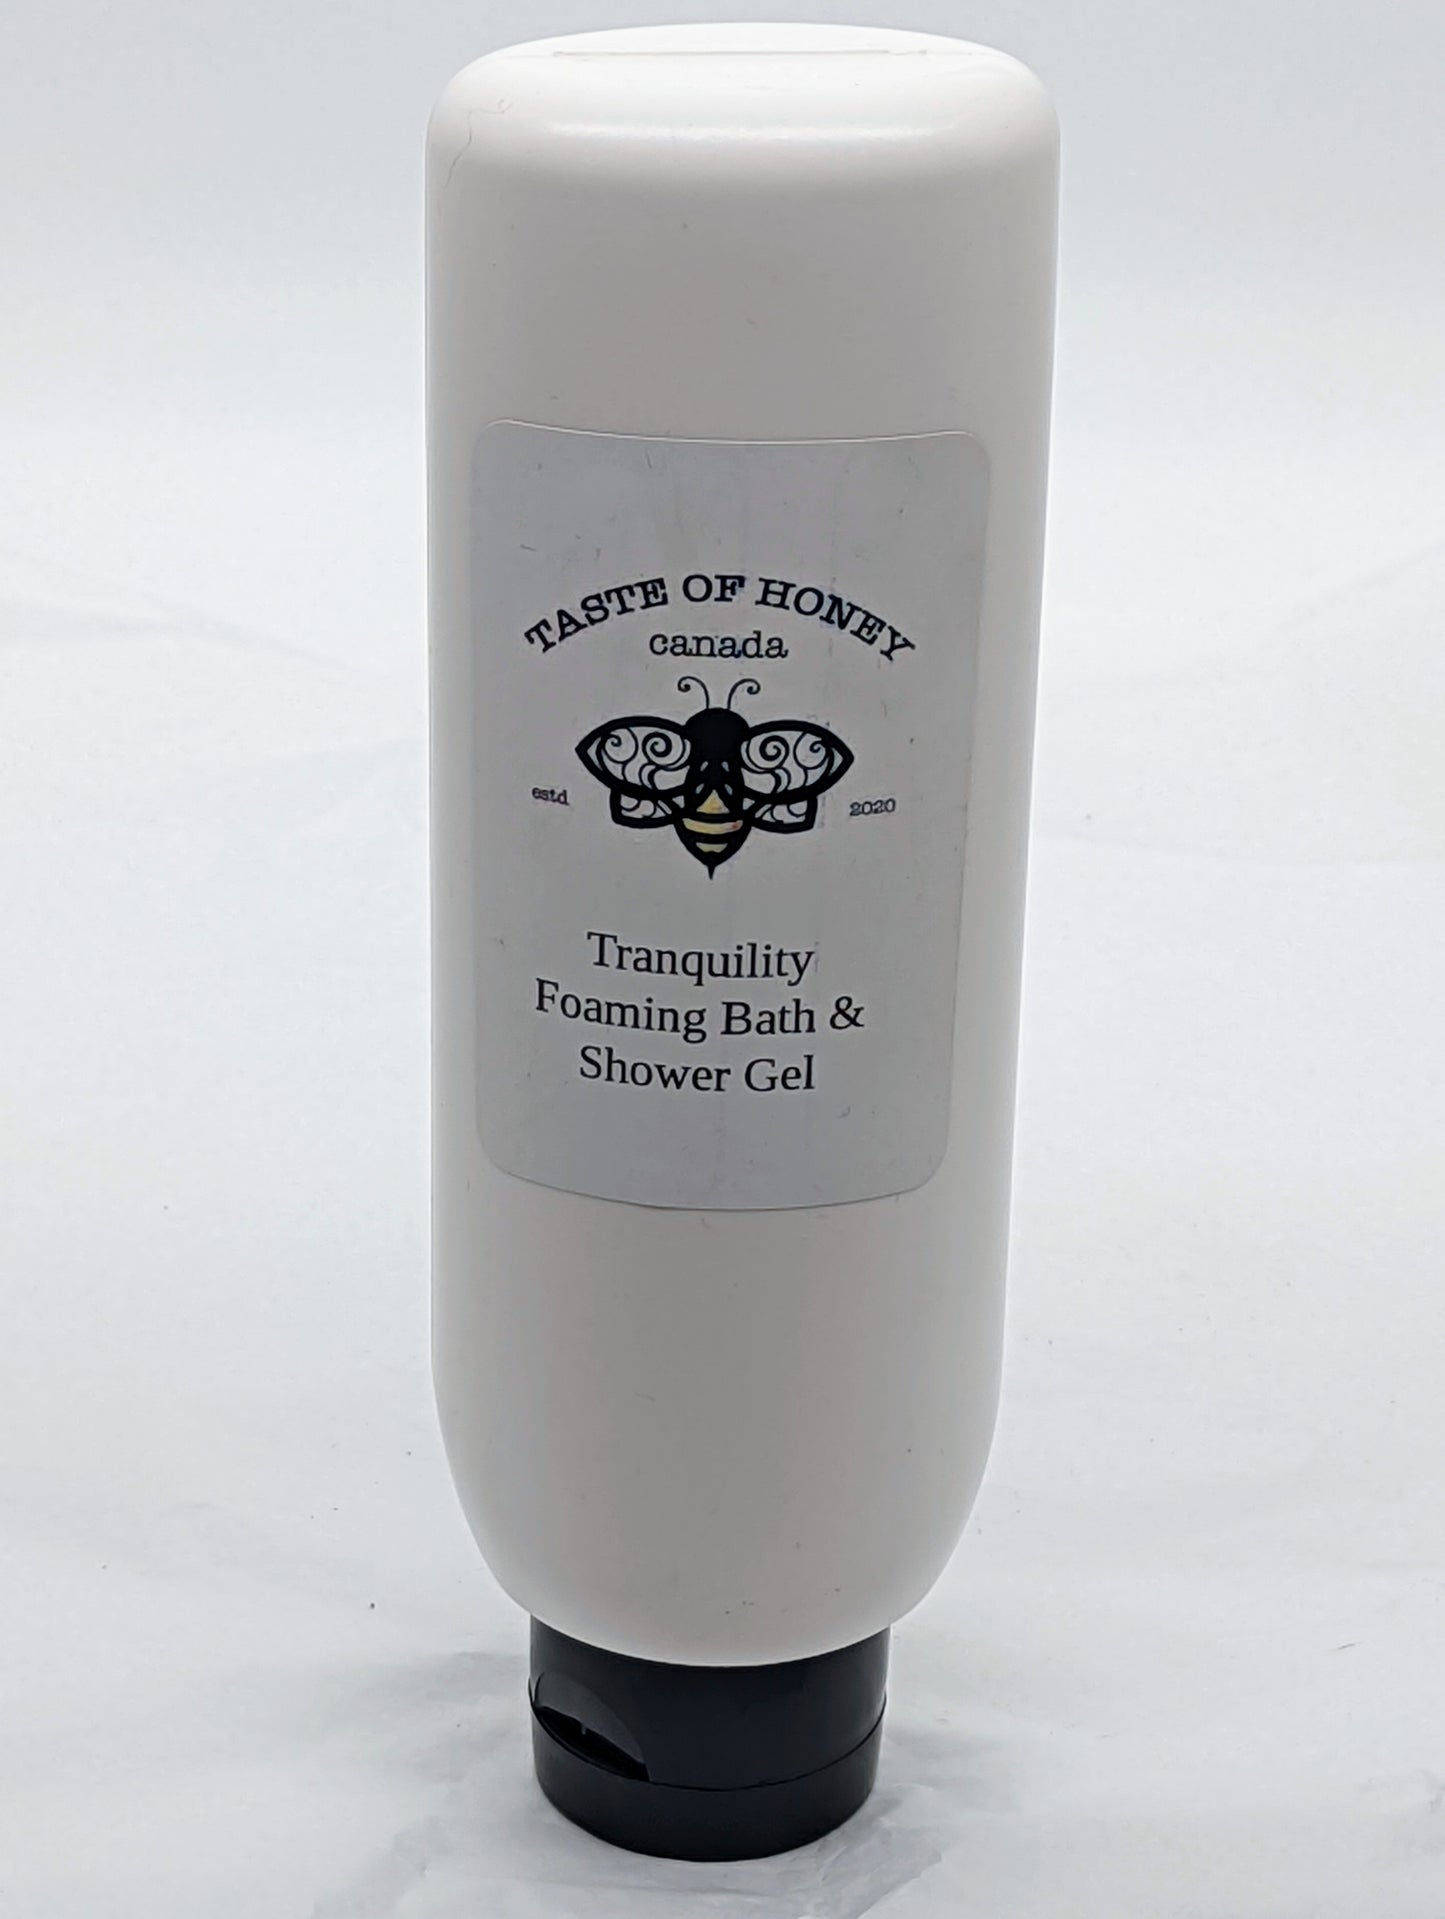 Tranquility Foaming Bath and Shower Gel.  With bottle with black lid.  Bee logo with Taste of Honey Canada.  